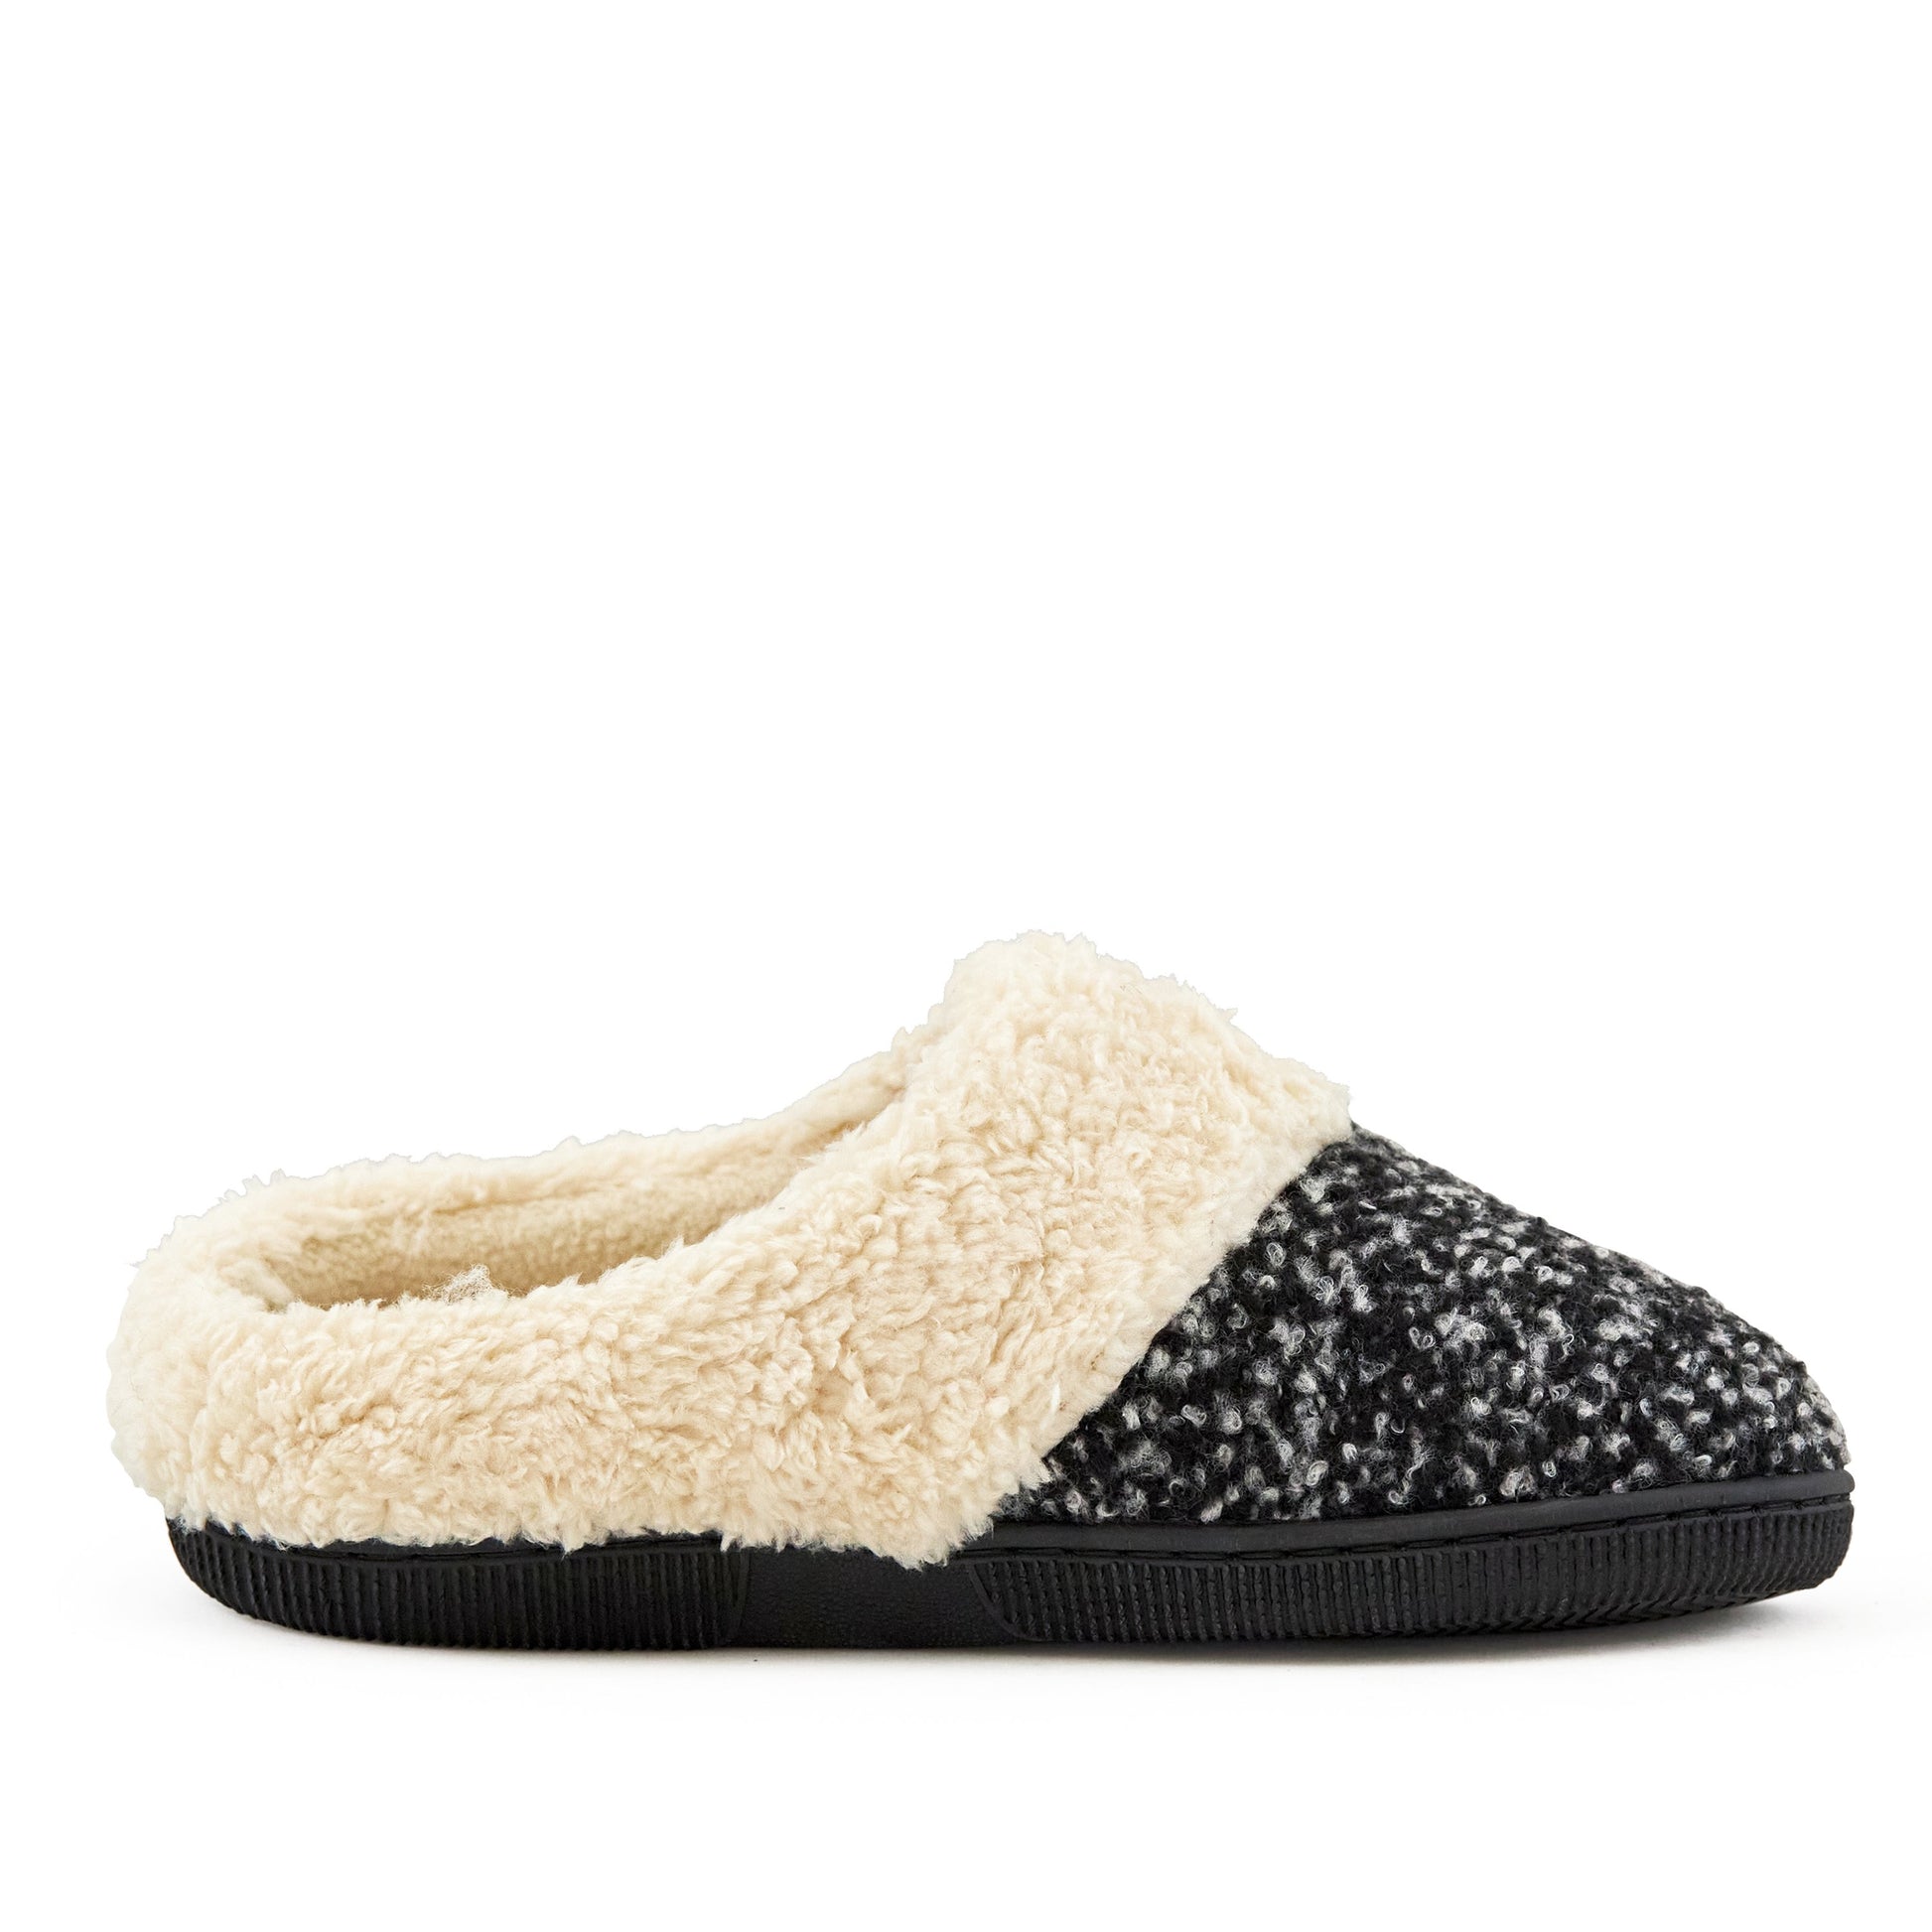 Cozy Grey Crumble Slippers | CozyCouture® - Stringspeed